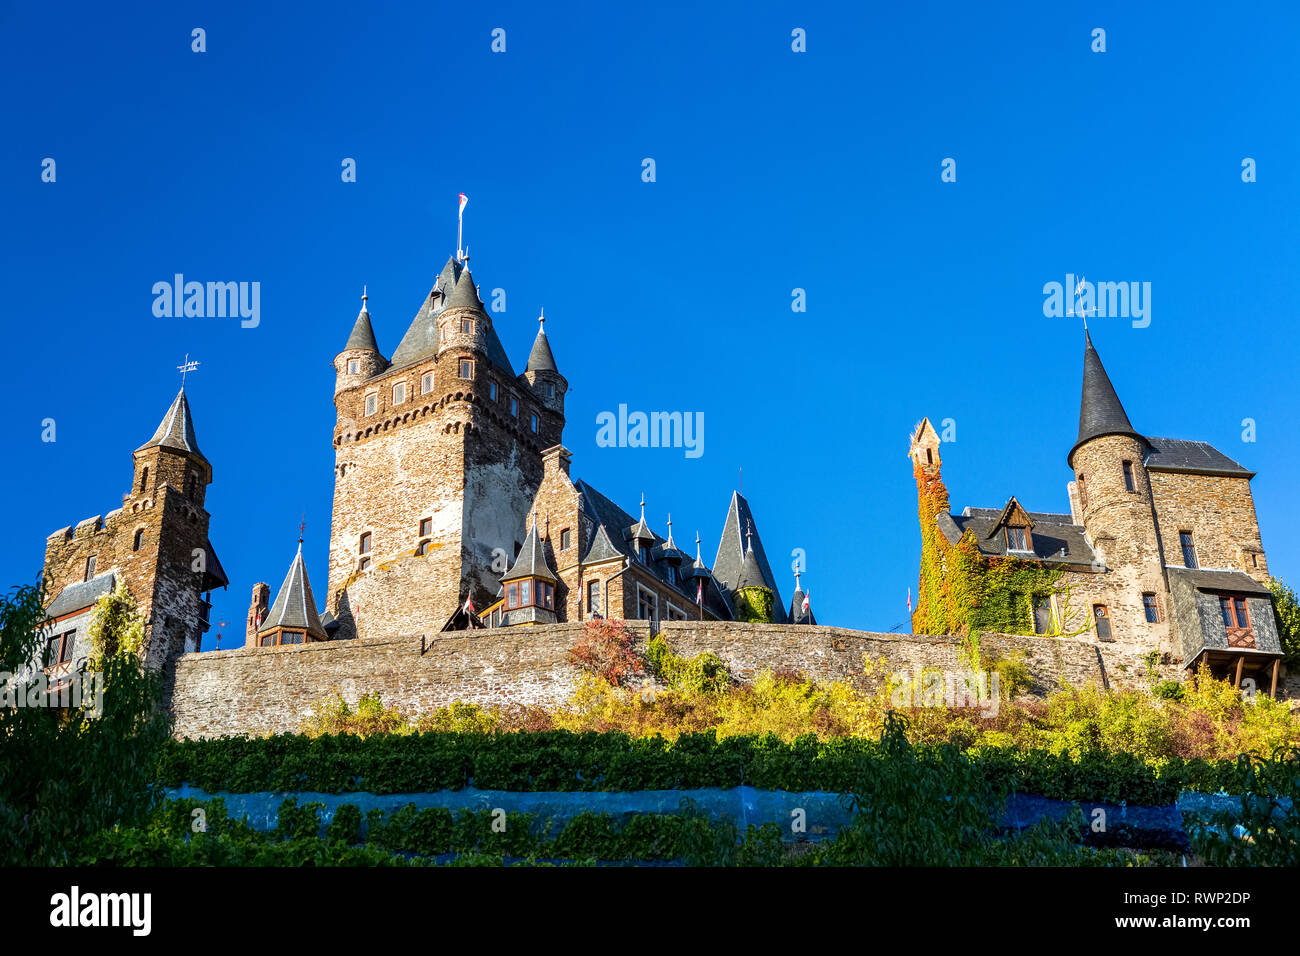 Looking up to old medieval stone castle with blue sky; Cochem, Germany Stock Photo